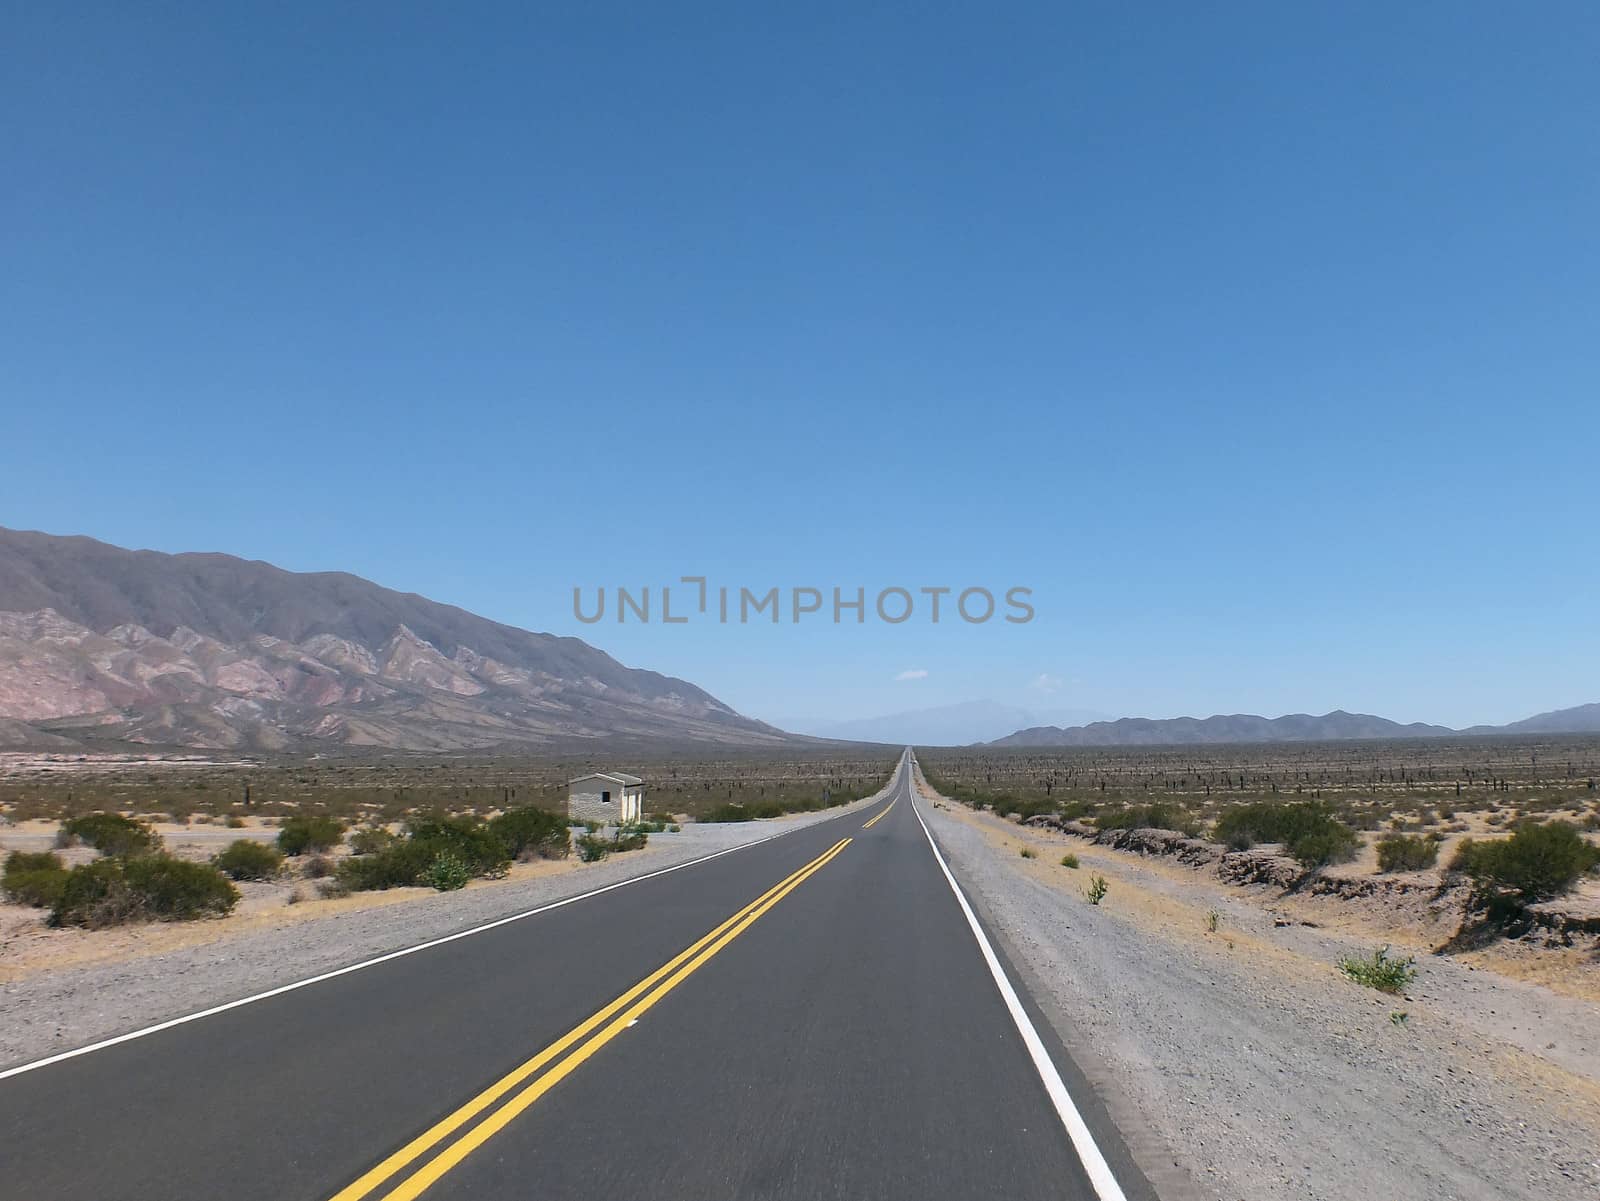 An empty road passing through the Los Cardones National Park